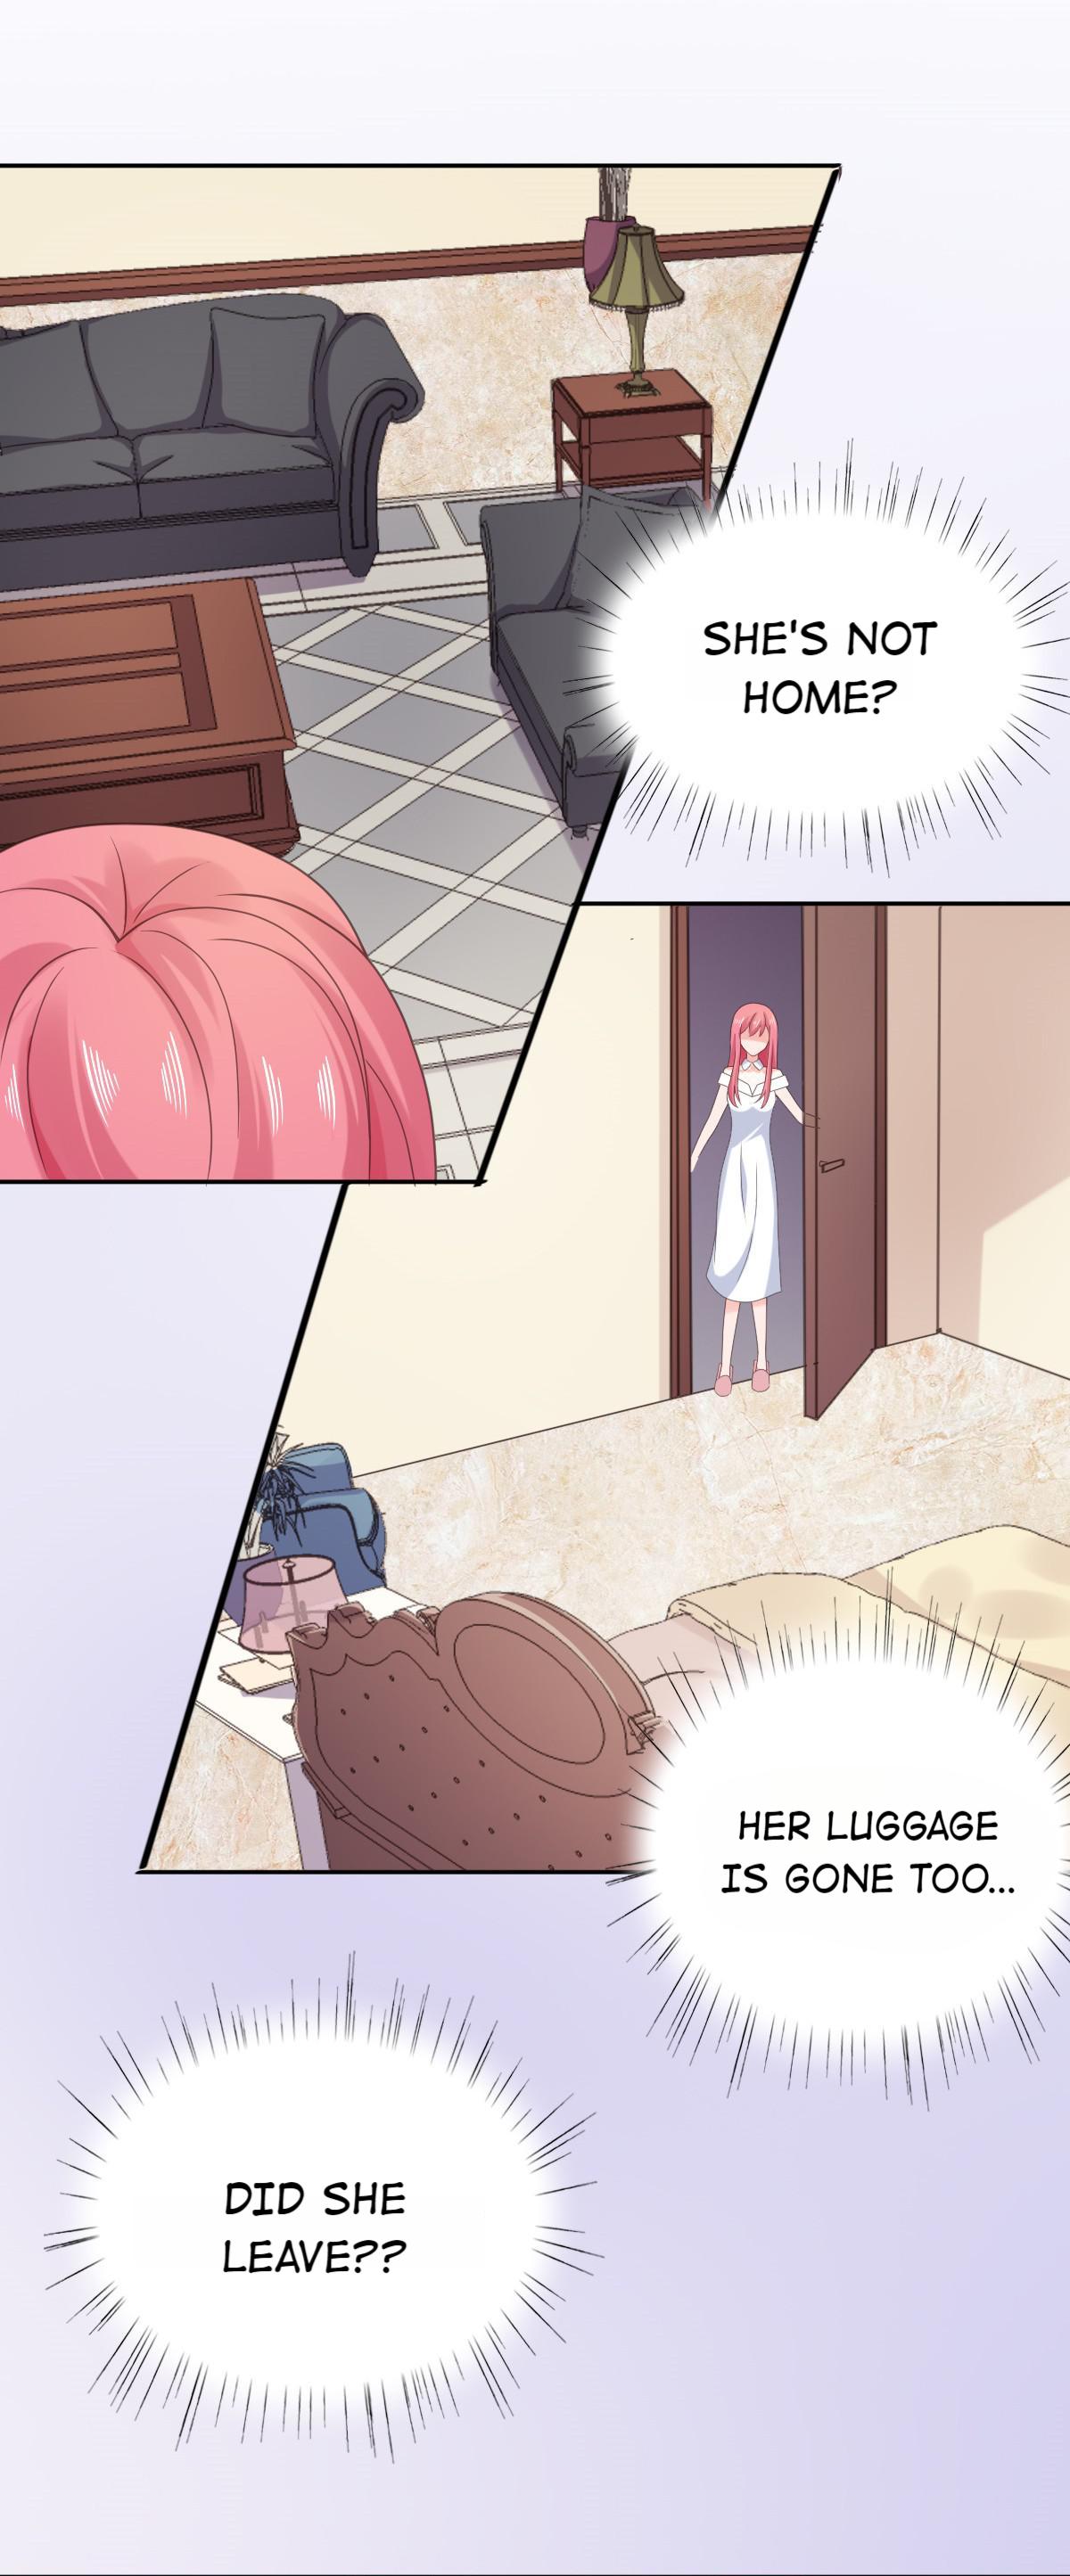 A Doting Marriage Dropped From The Clouds - Page 3